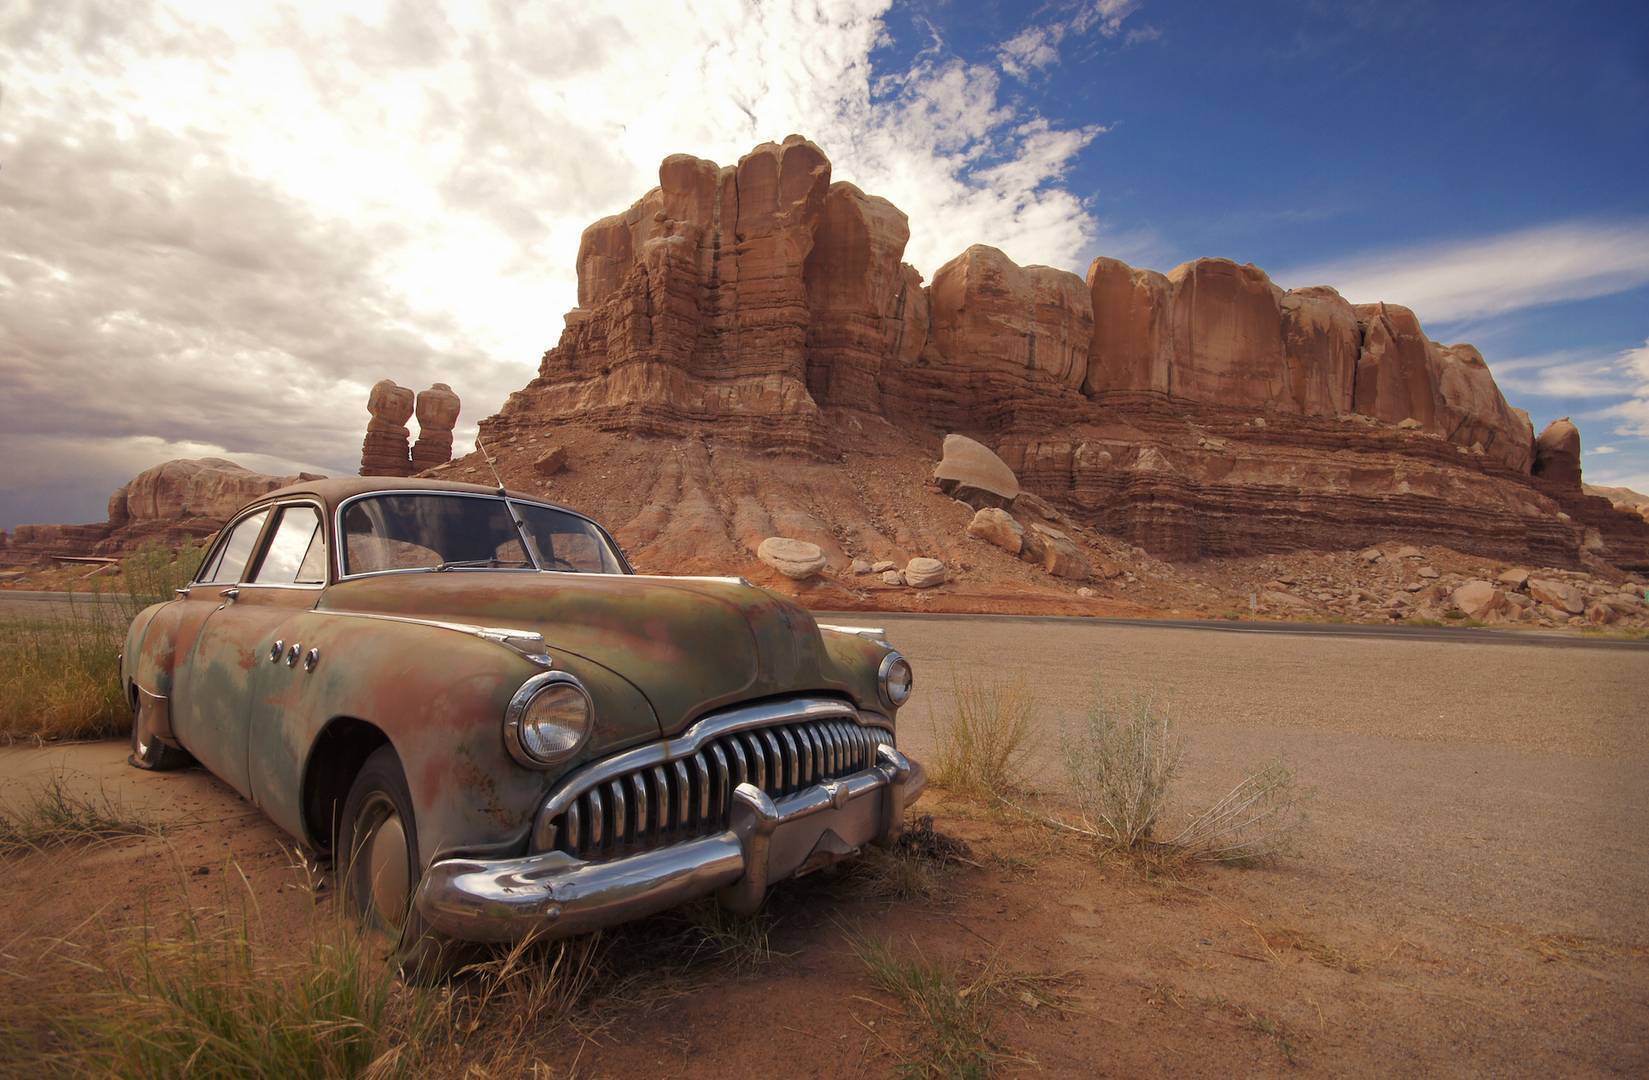 A rusted immobilized vehicle alone in the desert beside a dusty road.